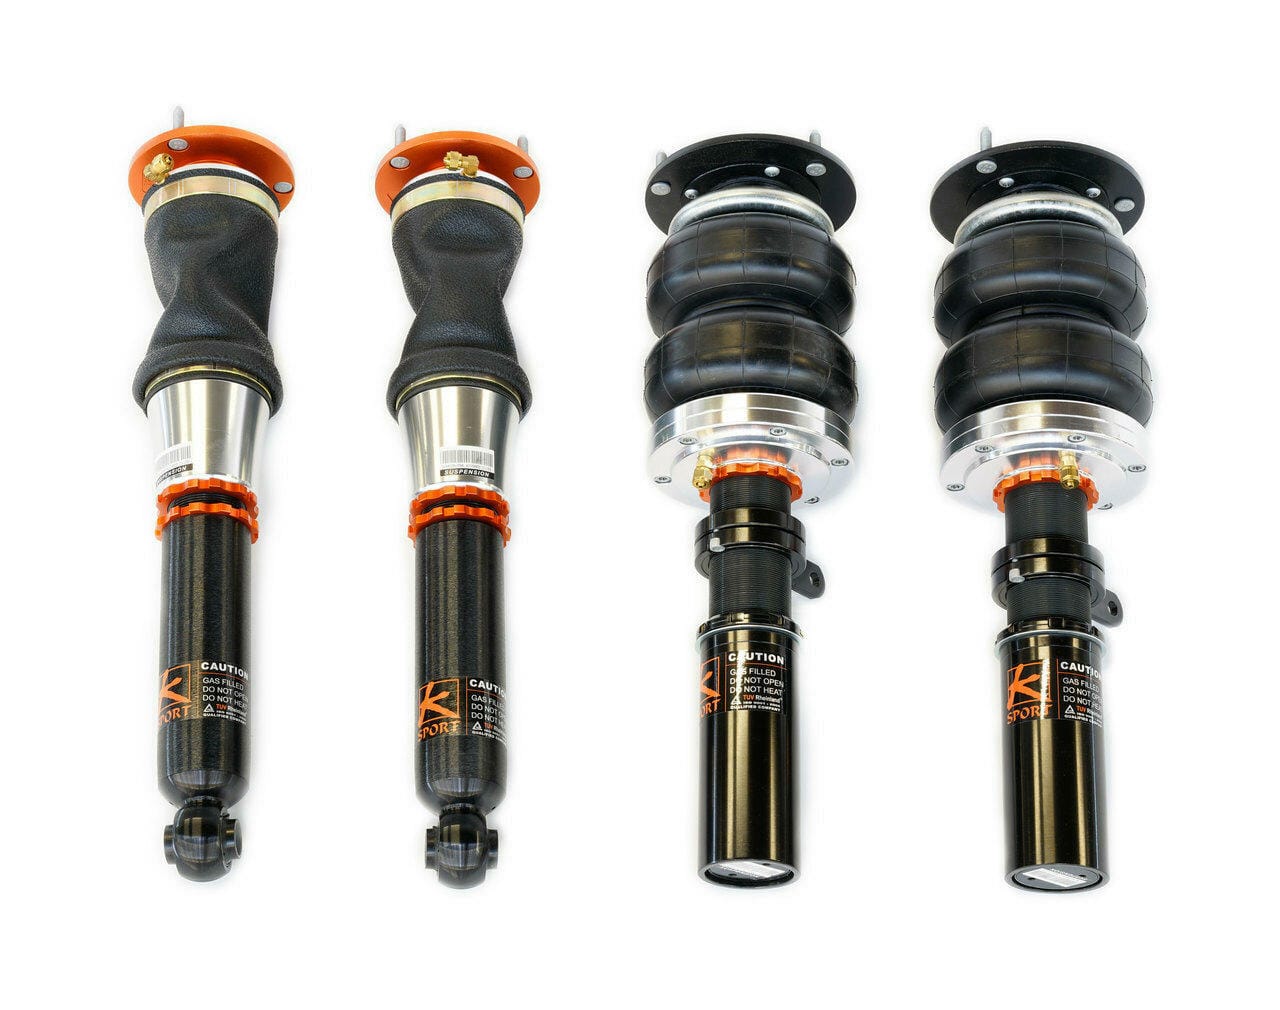 Ksport Airtech Air Suspension System Struts Only - 2016-2018 Honda Civic Coupe/Sedan Excl Si, Hatchback, Type R CHD420-ASO-01